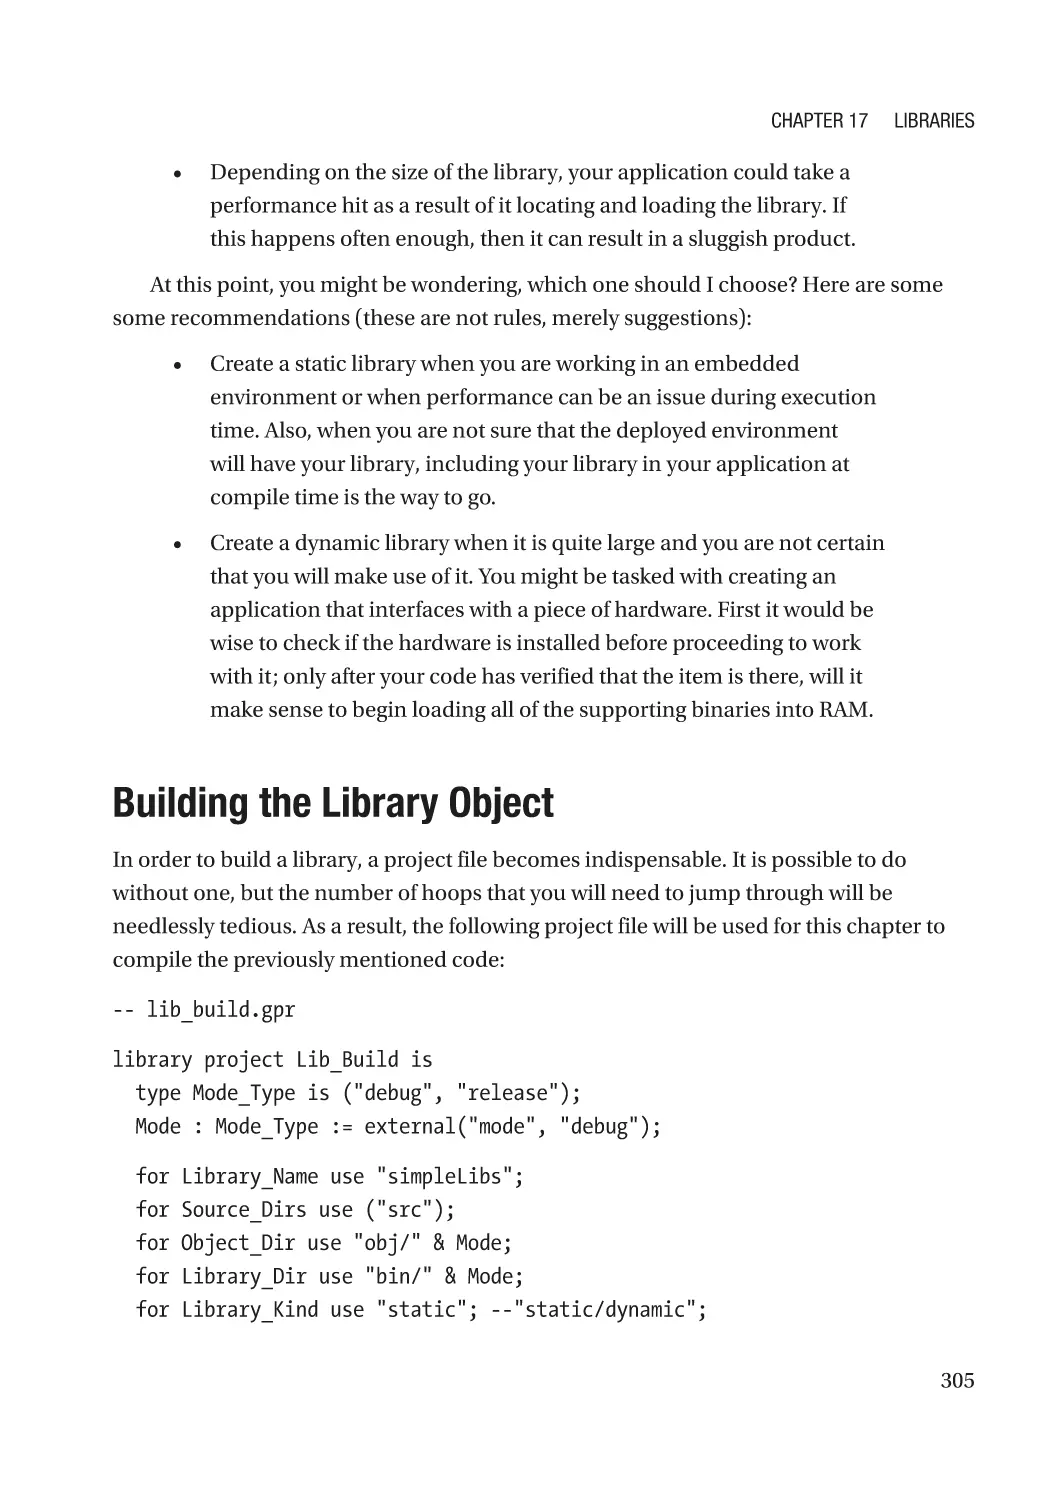 Building the Library Object